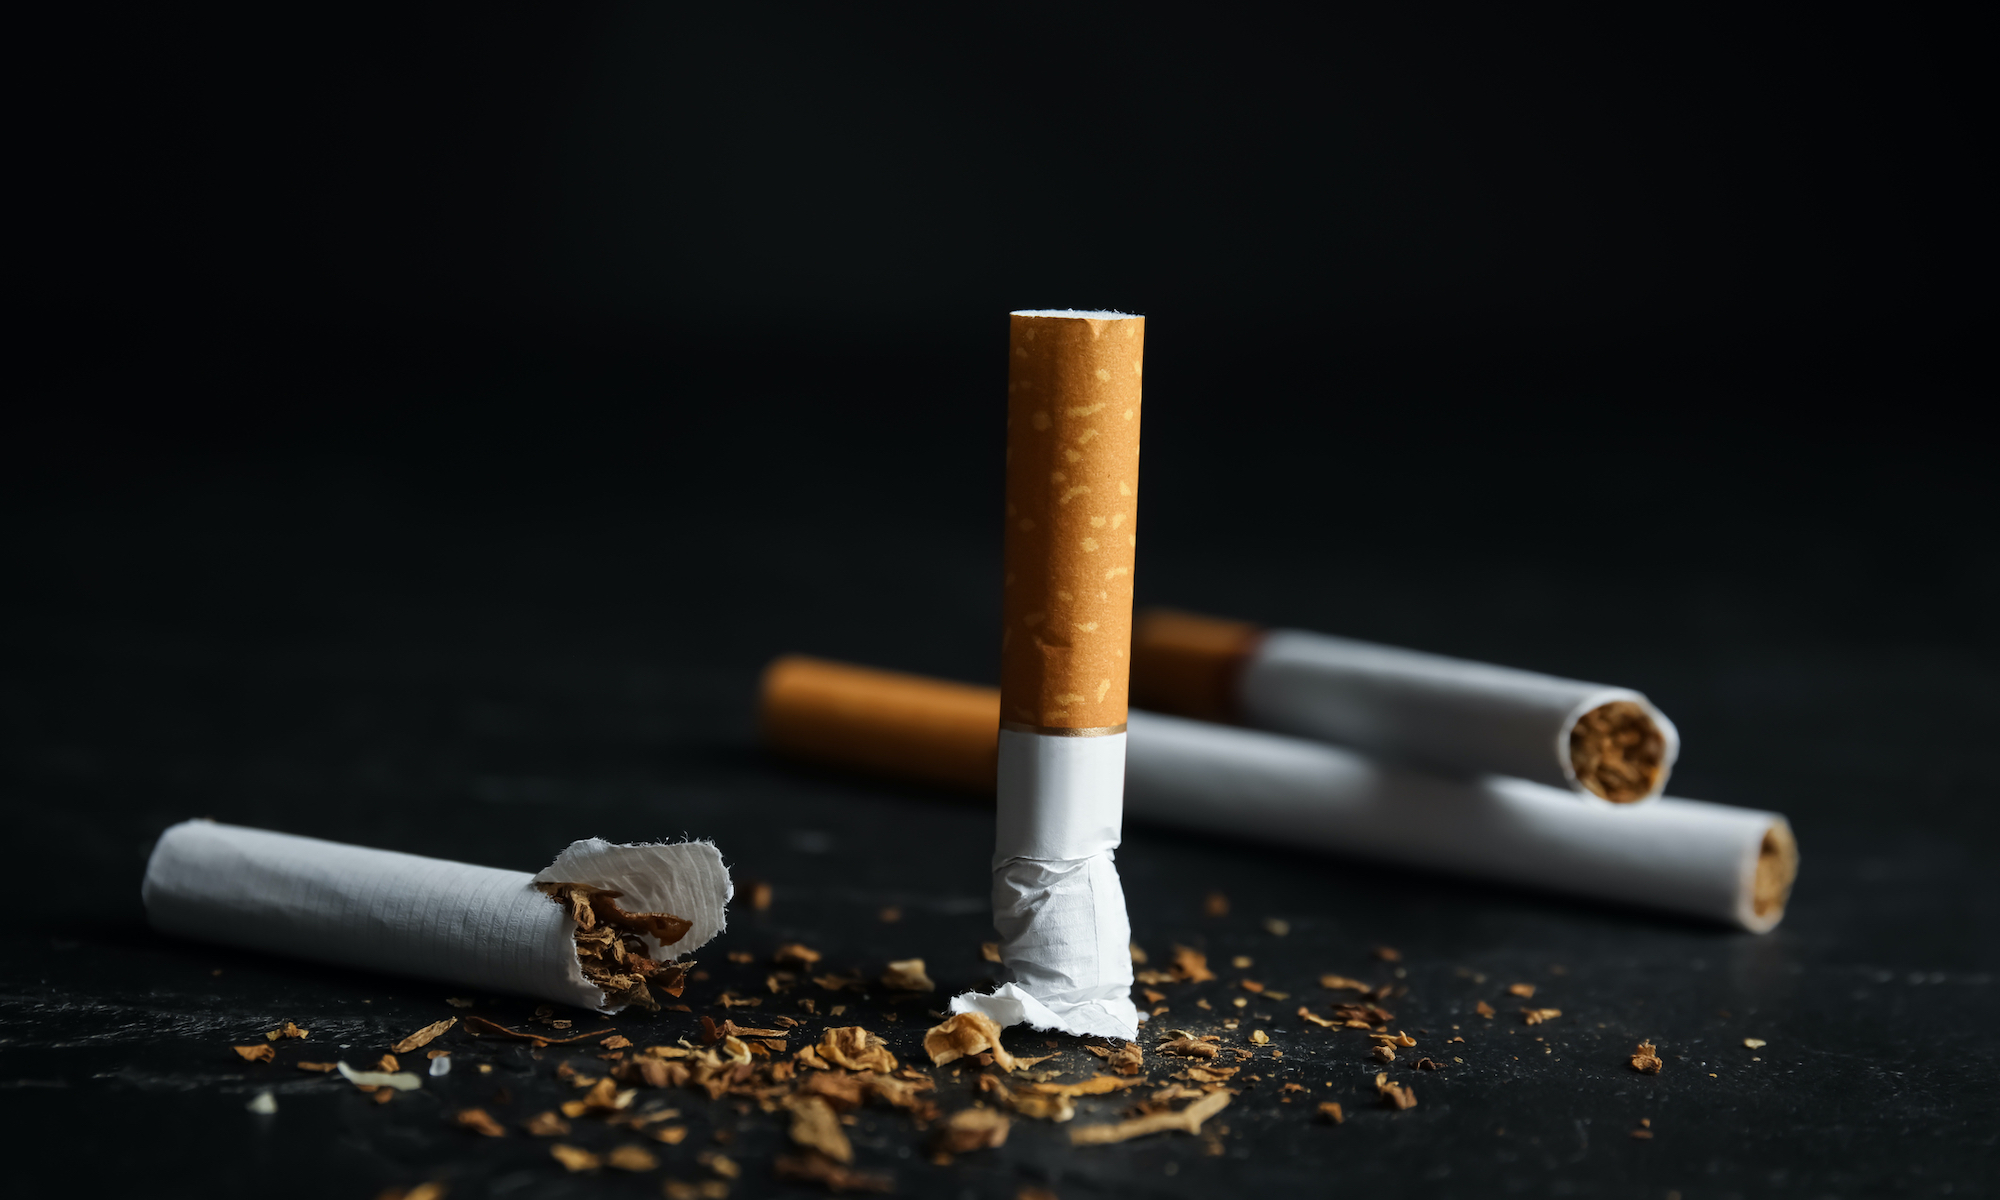 A put-out cigarette standing on its end, next to half of another crumpled cigarette. In the background are two whole cigarettes.